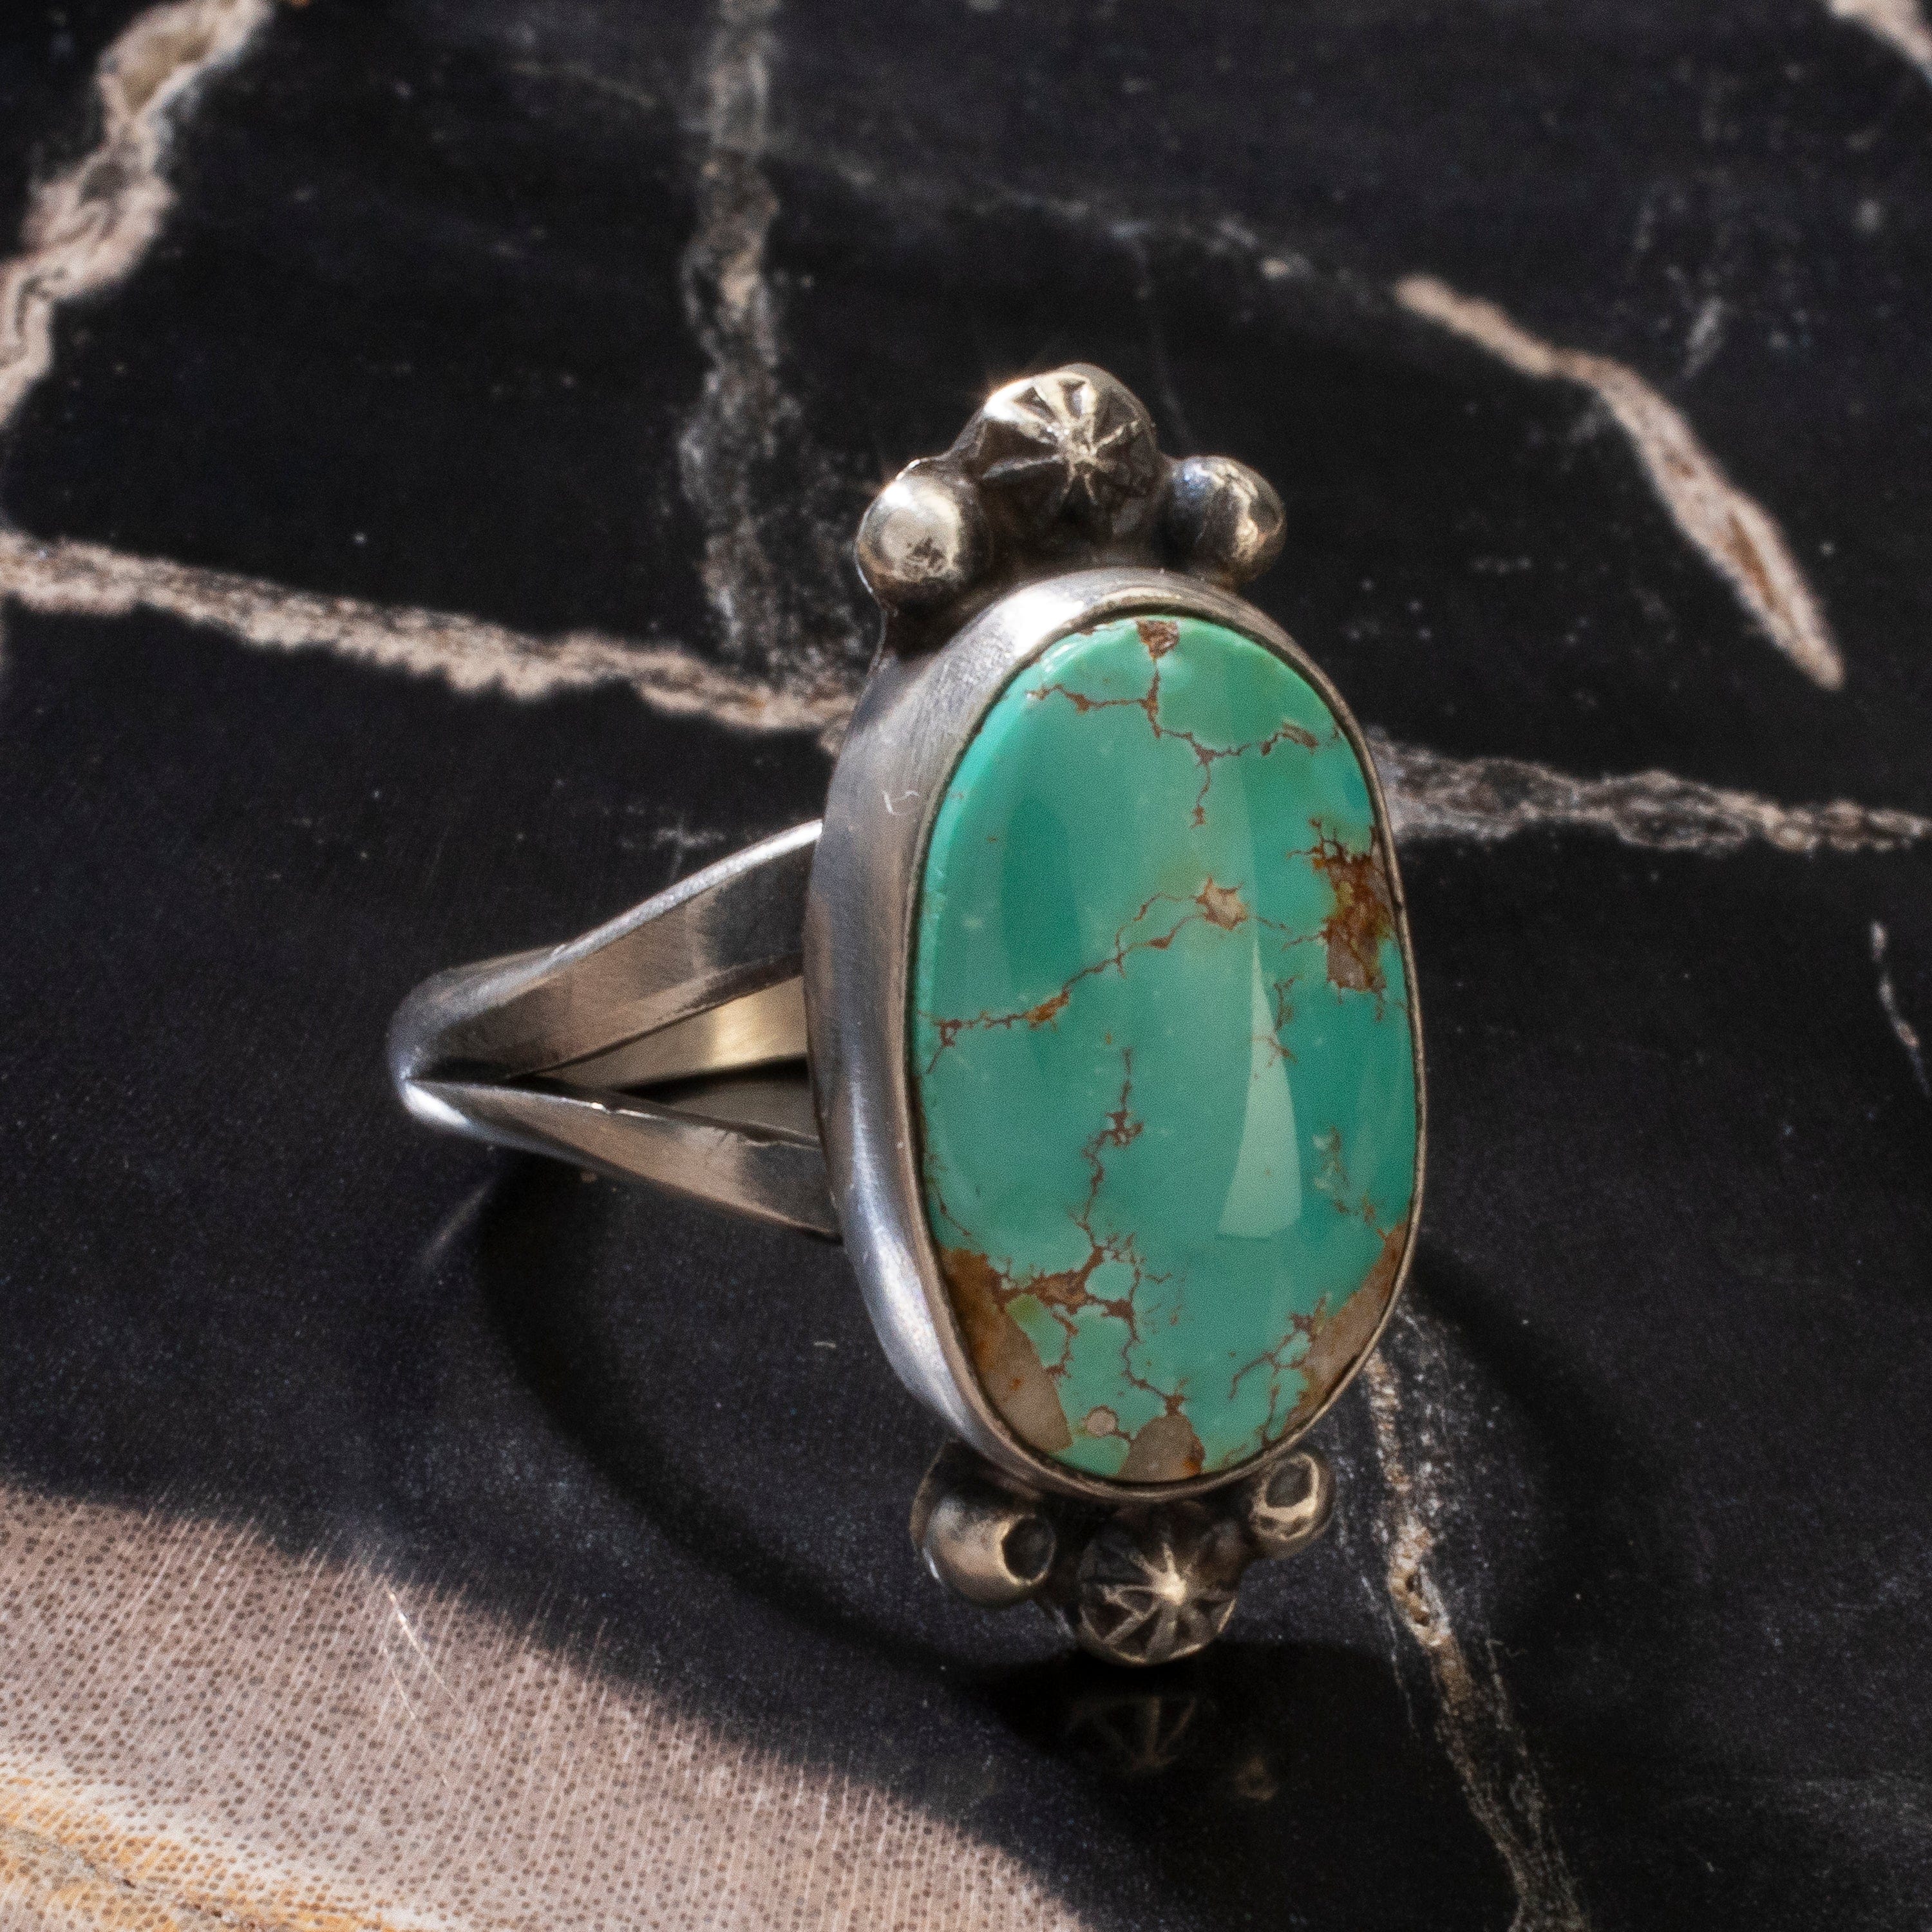 Kalifano Native American Jewelry 7.5 Scott Skeets Royston Turquoise Navajo USA Native American Made 925 Sterling Silver Ring NAR600.069.75